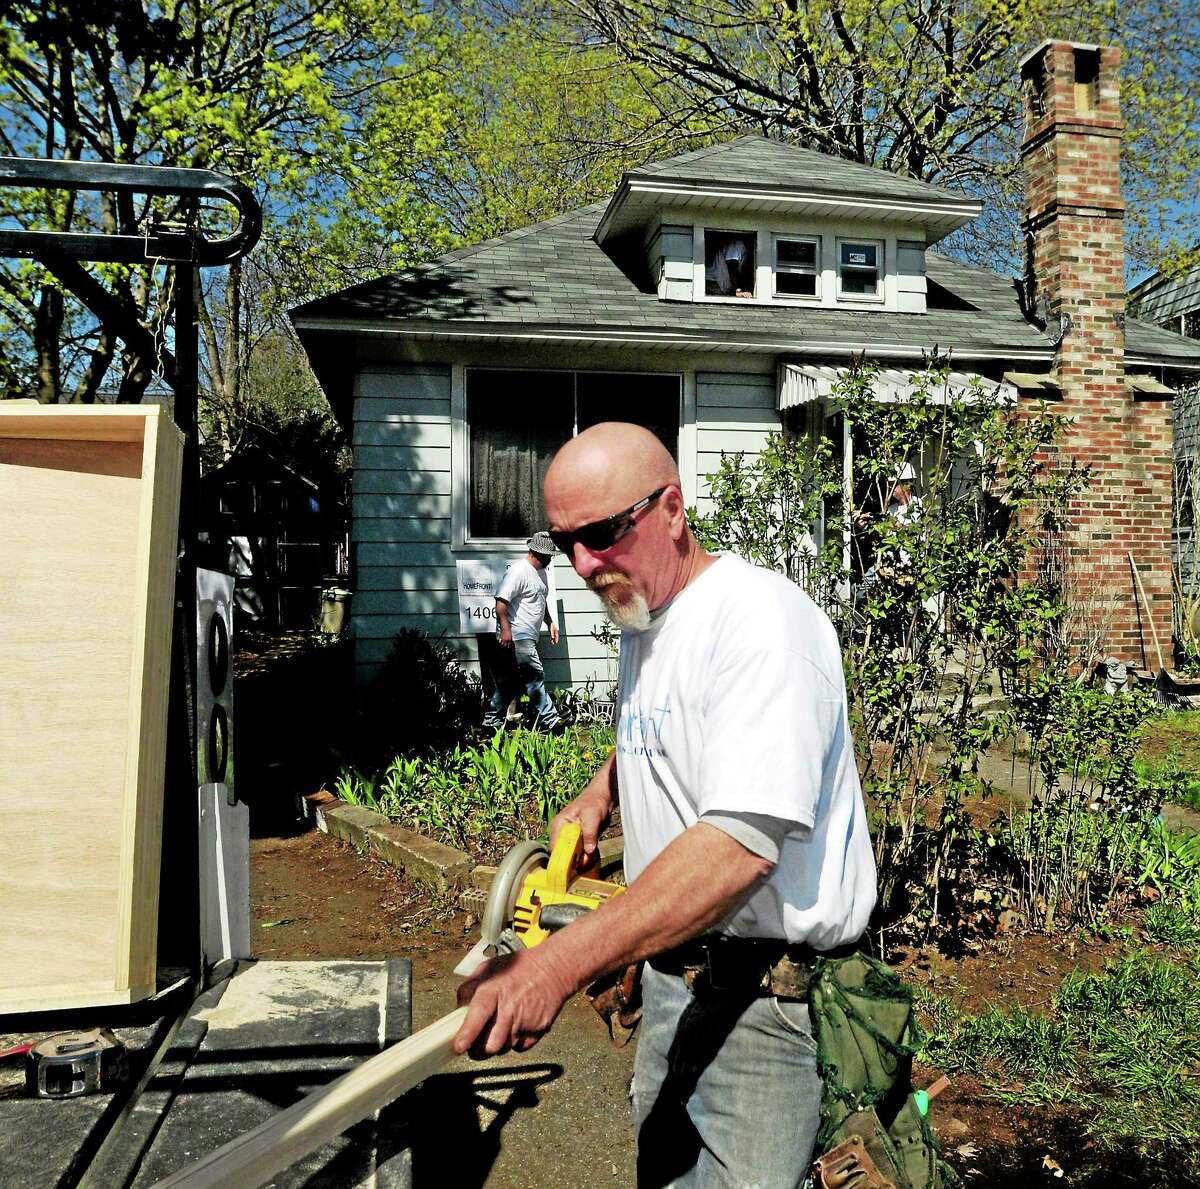 Union carpenter Tom Robison of Ansonia, a HomeFront Inc. volunteer, prepares to cut wood during a renovation project Saturday at the Malewicki residence on Whitney Avenue in Milford.